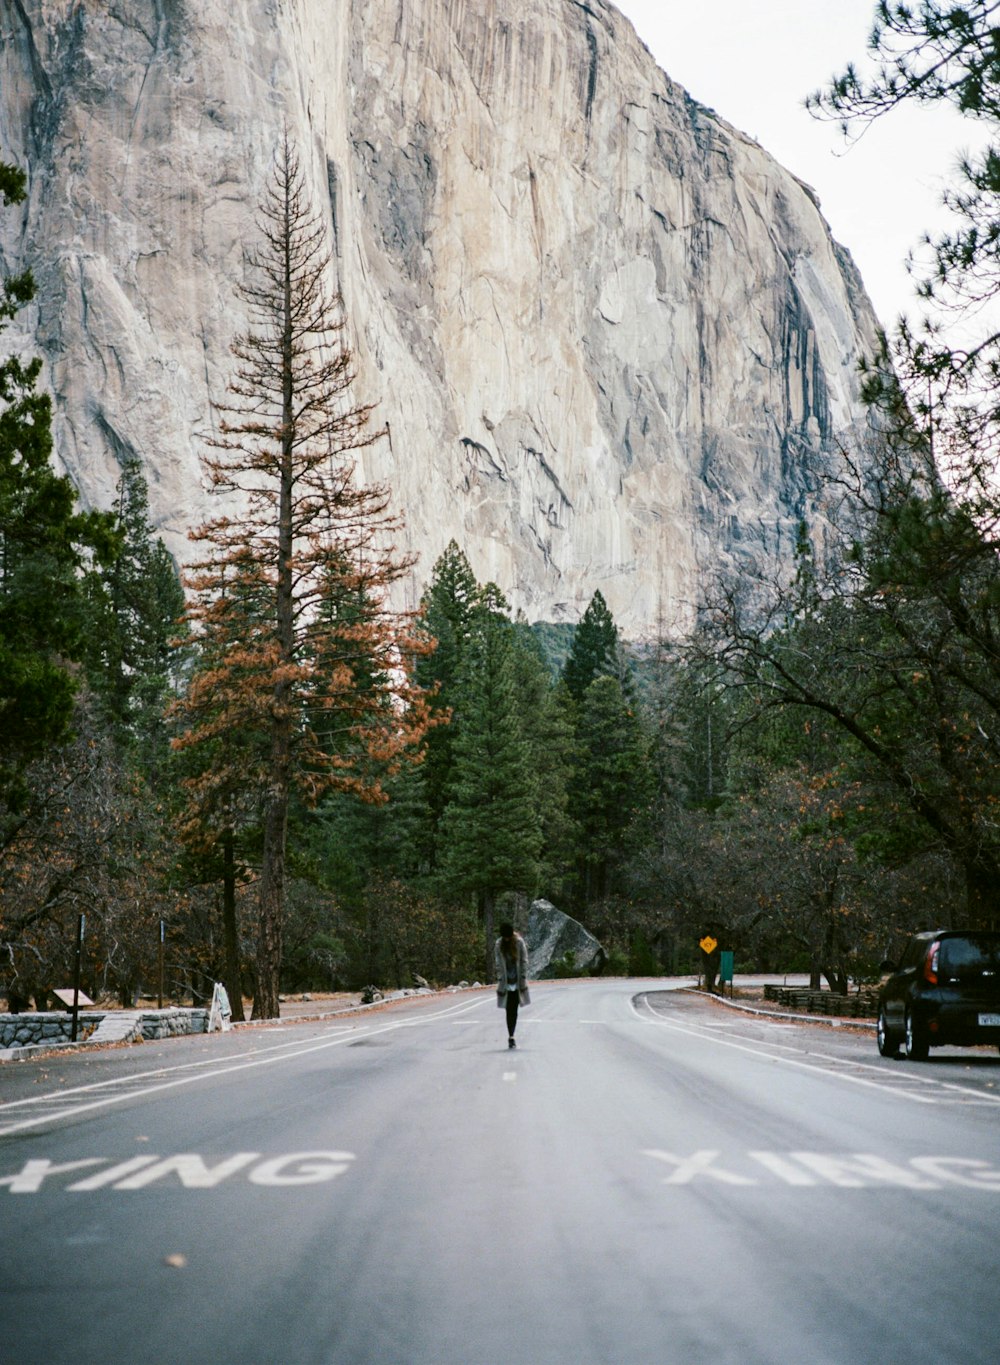 person walking on road between trees and mountain in distance